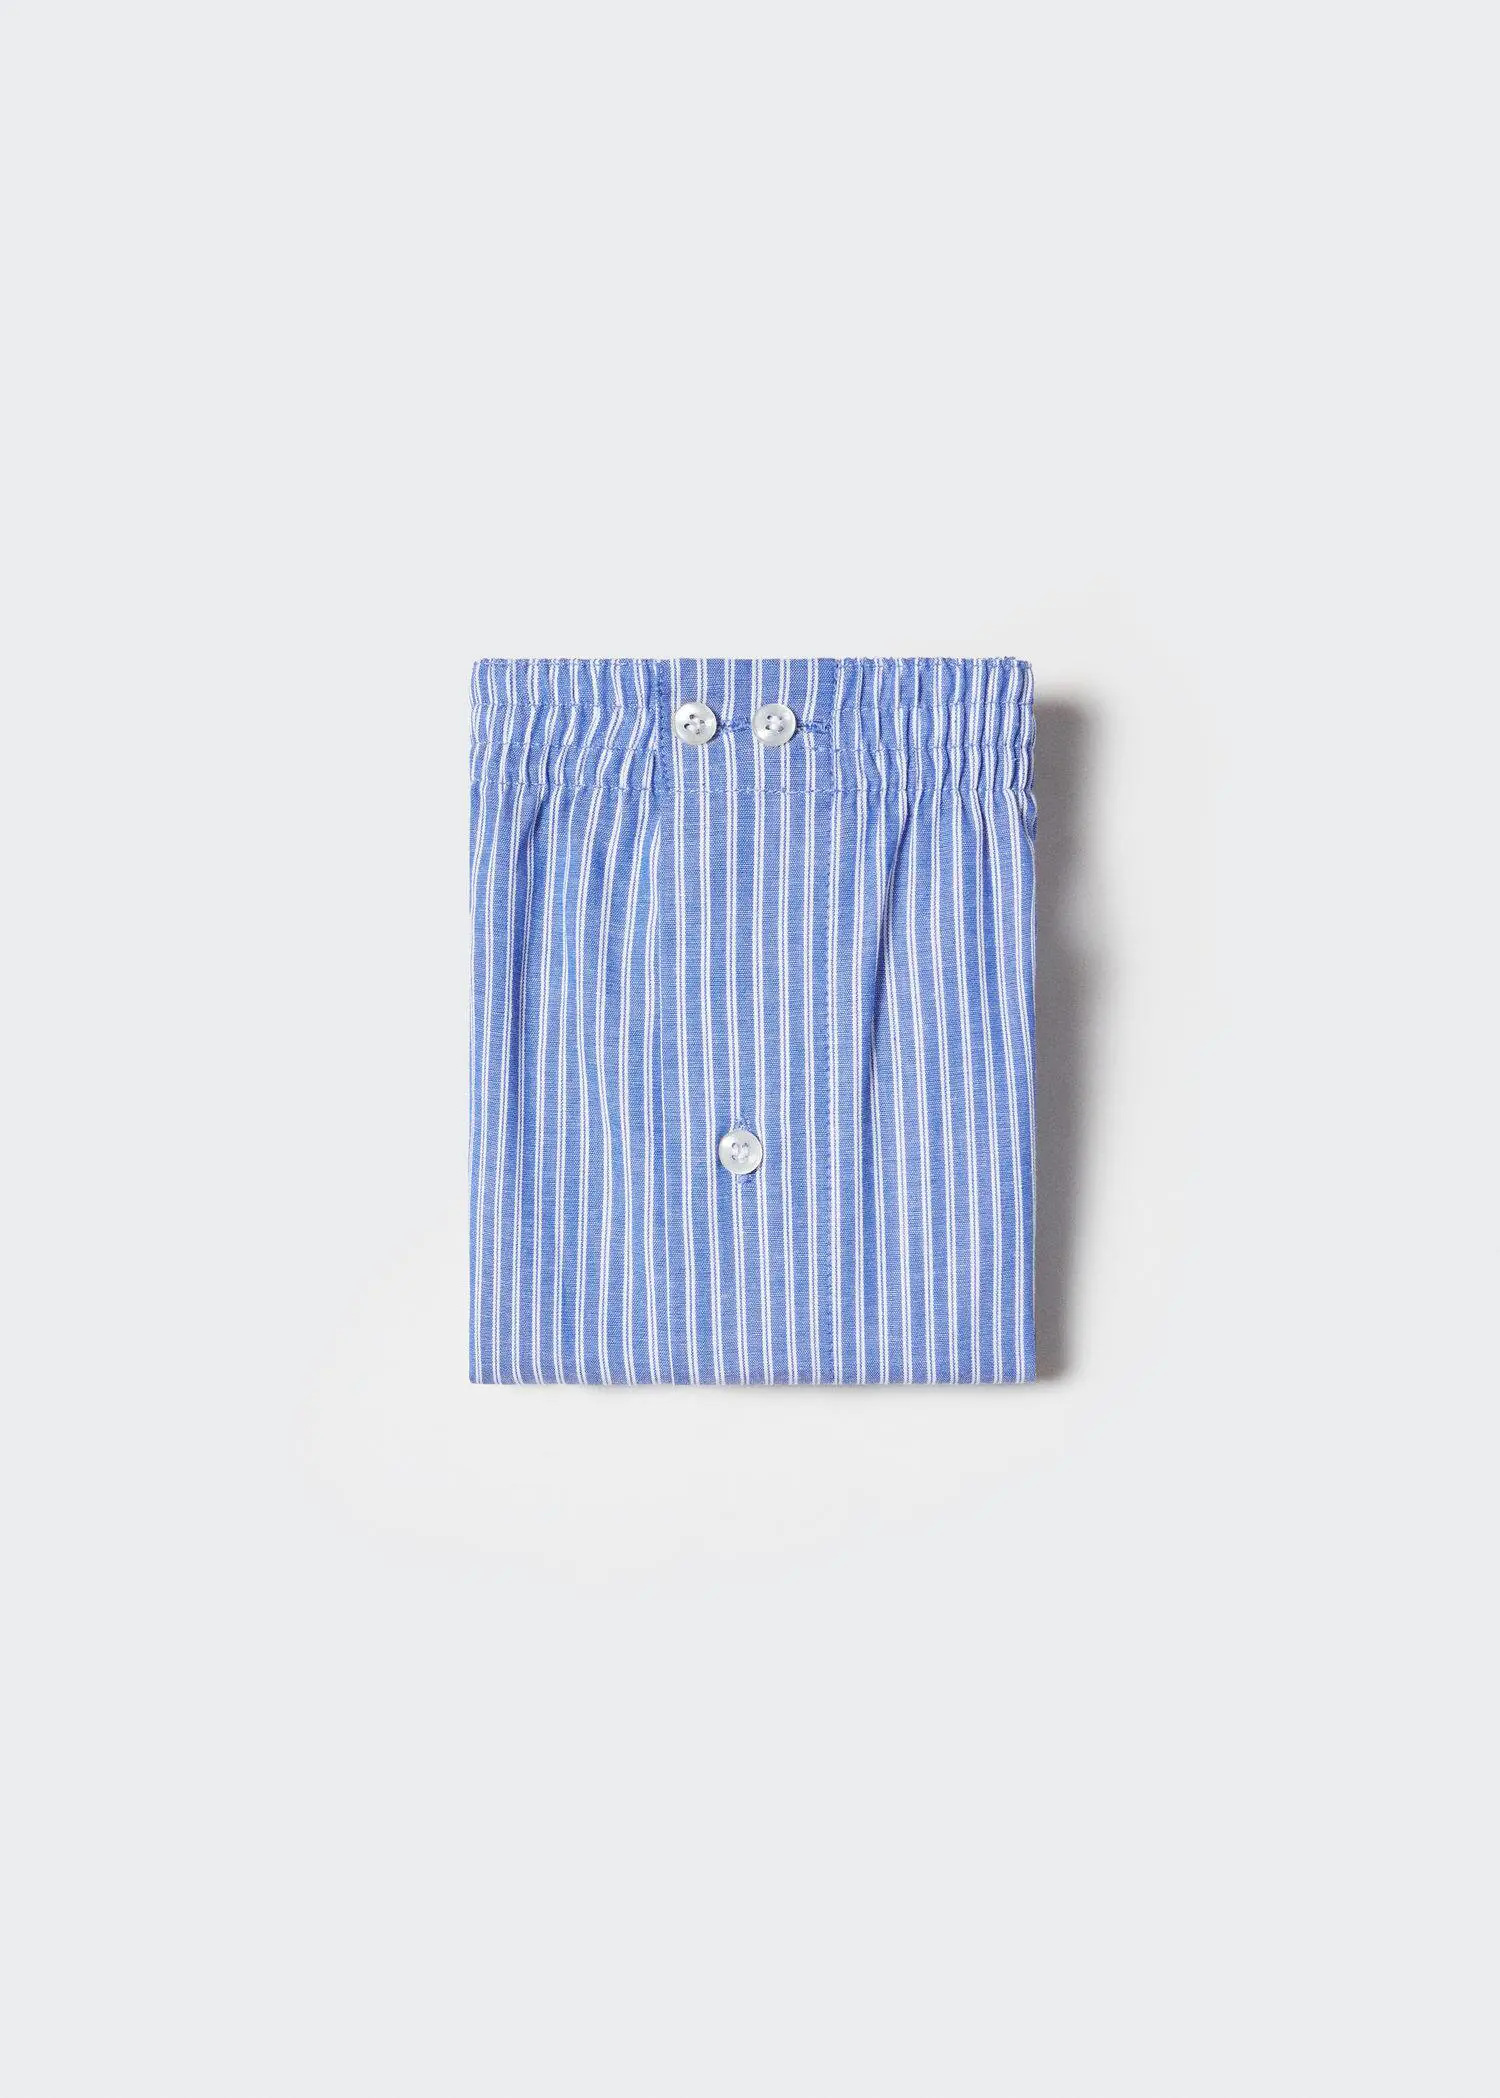 Mango 100% cotton striped briefs. a blue and white striped shirt on a white background. 